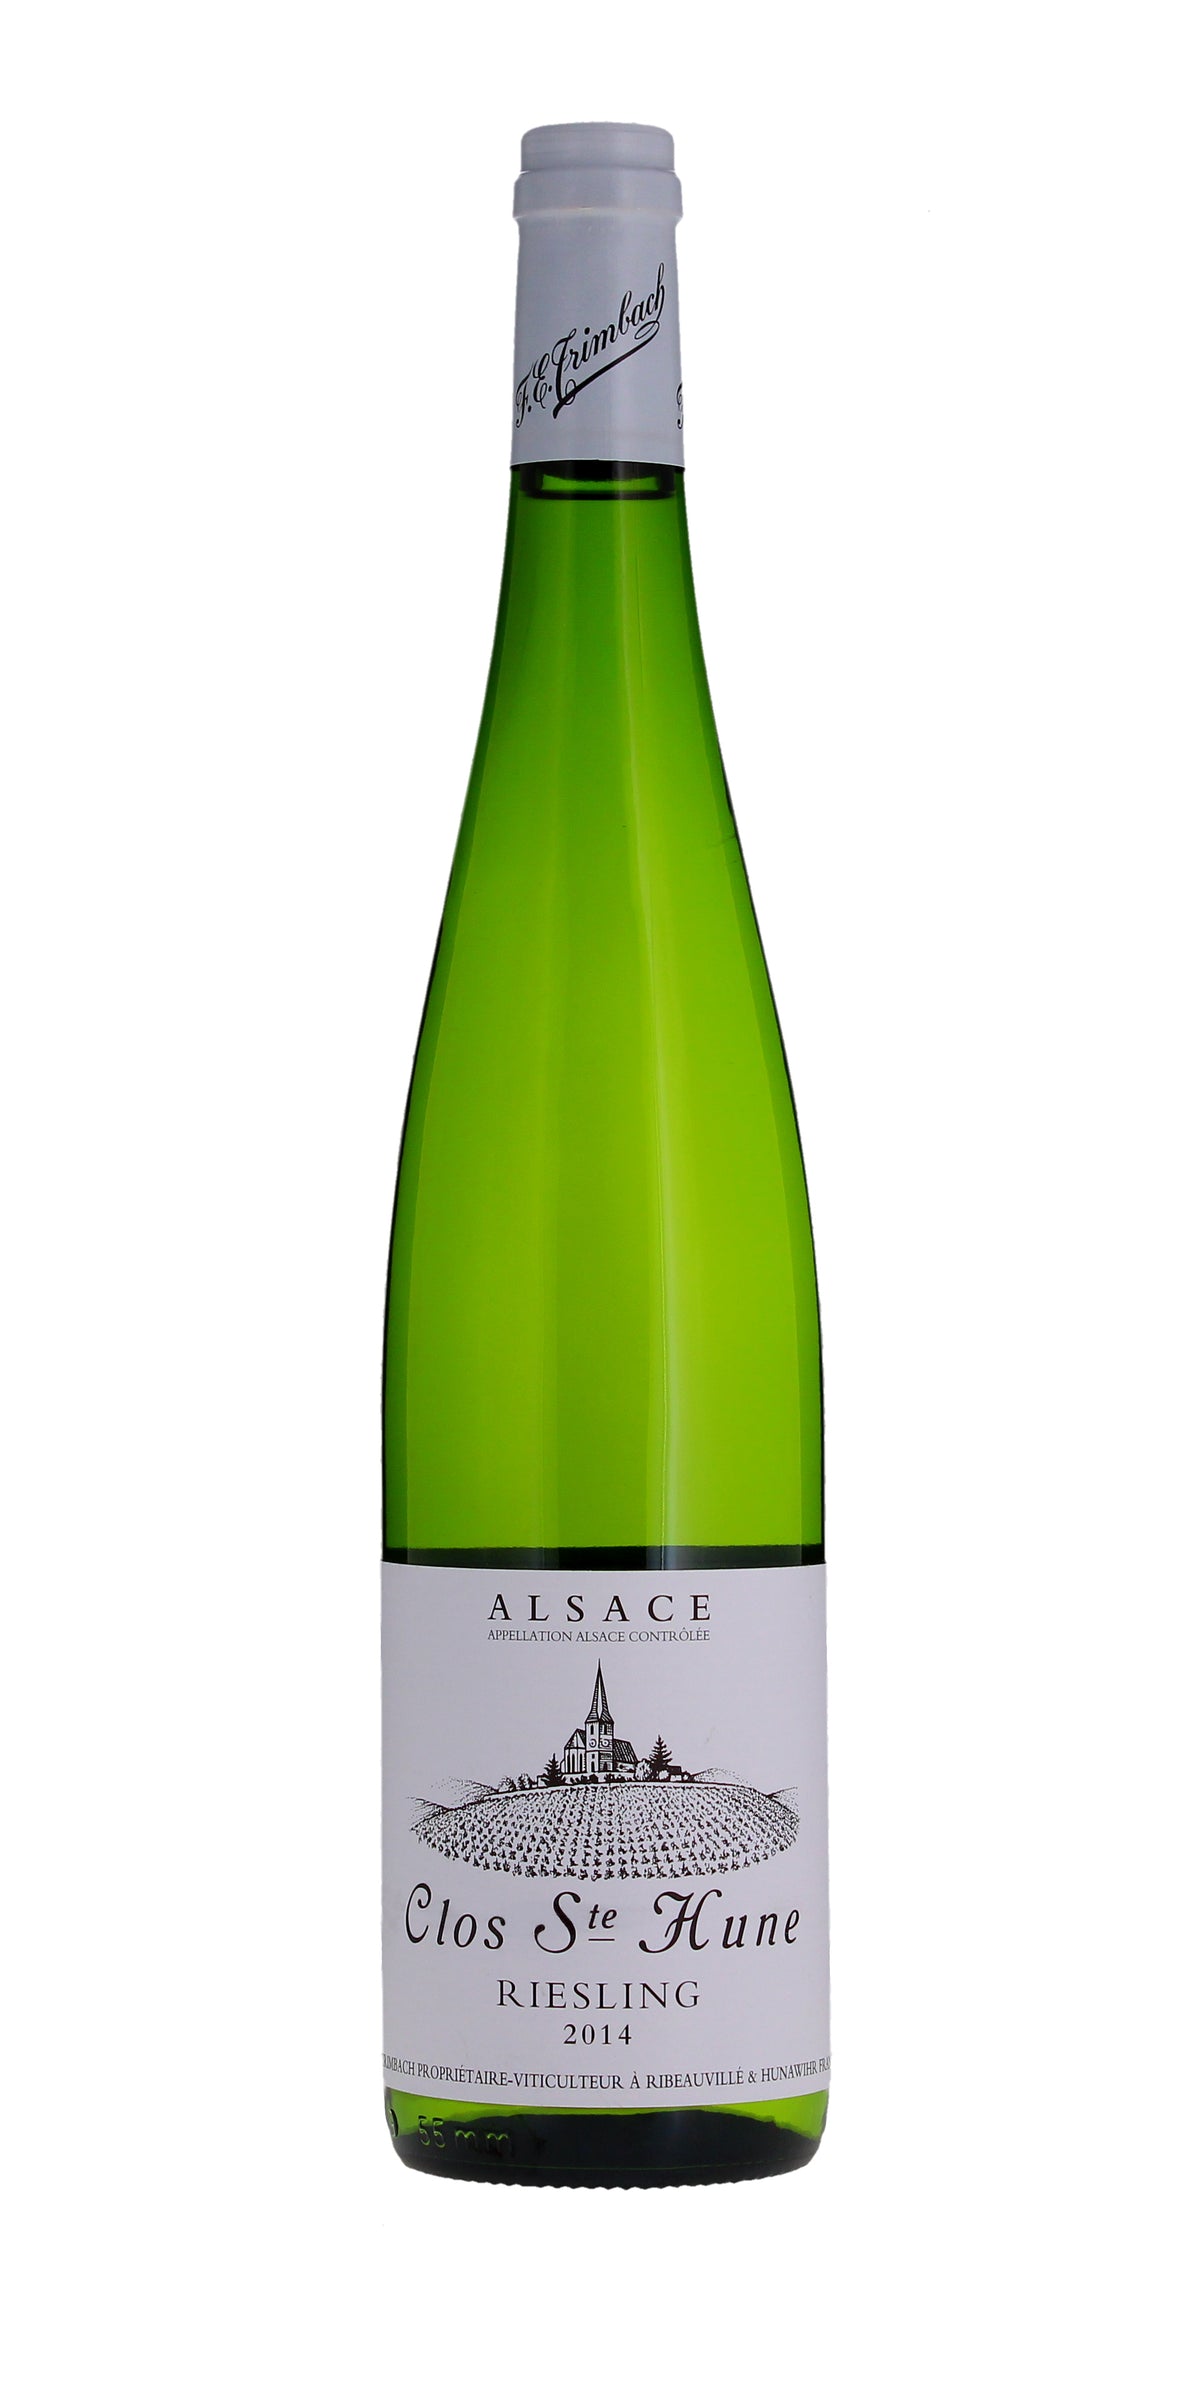 Trimbach, Clos St Hune, Riesling, 2014